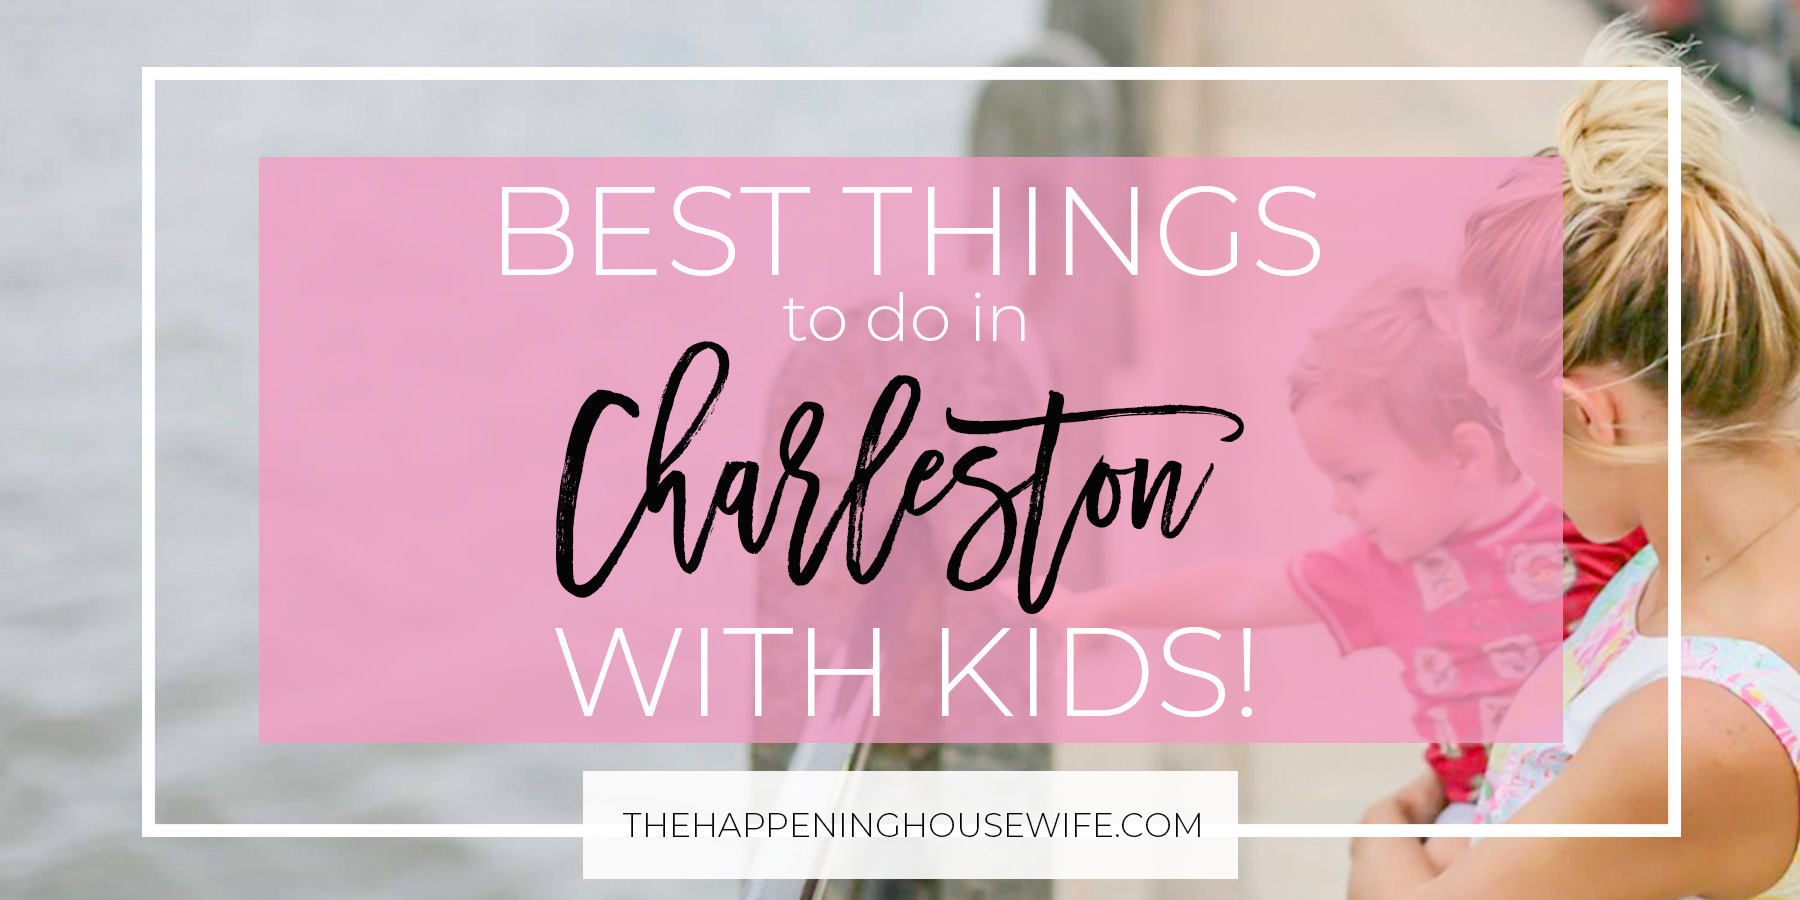 BEST THINGS TO DO IN CHARLESTON WITH KIDS!.jpg